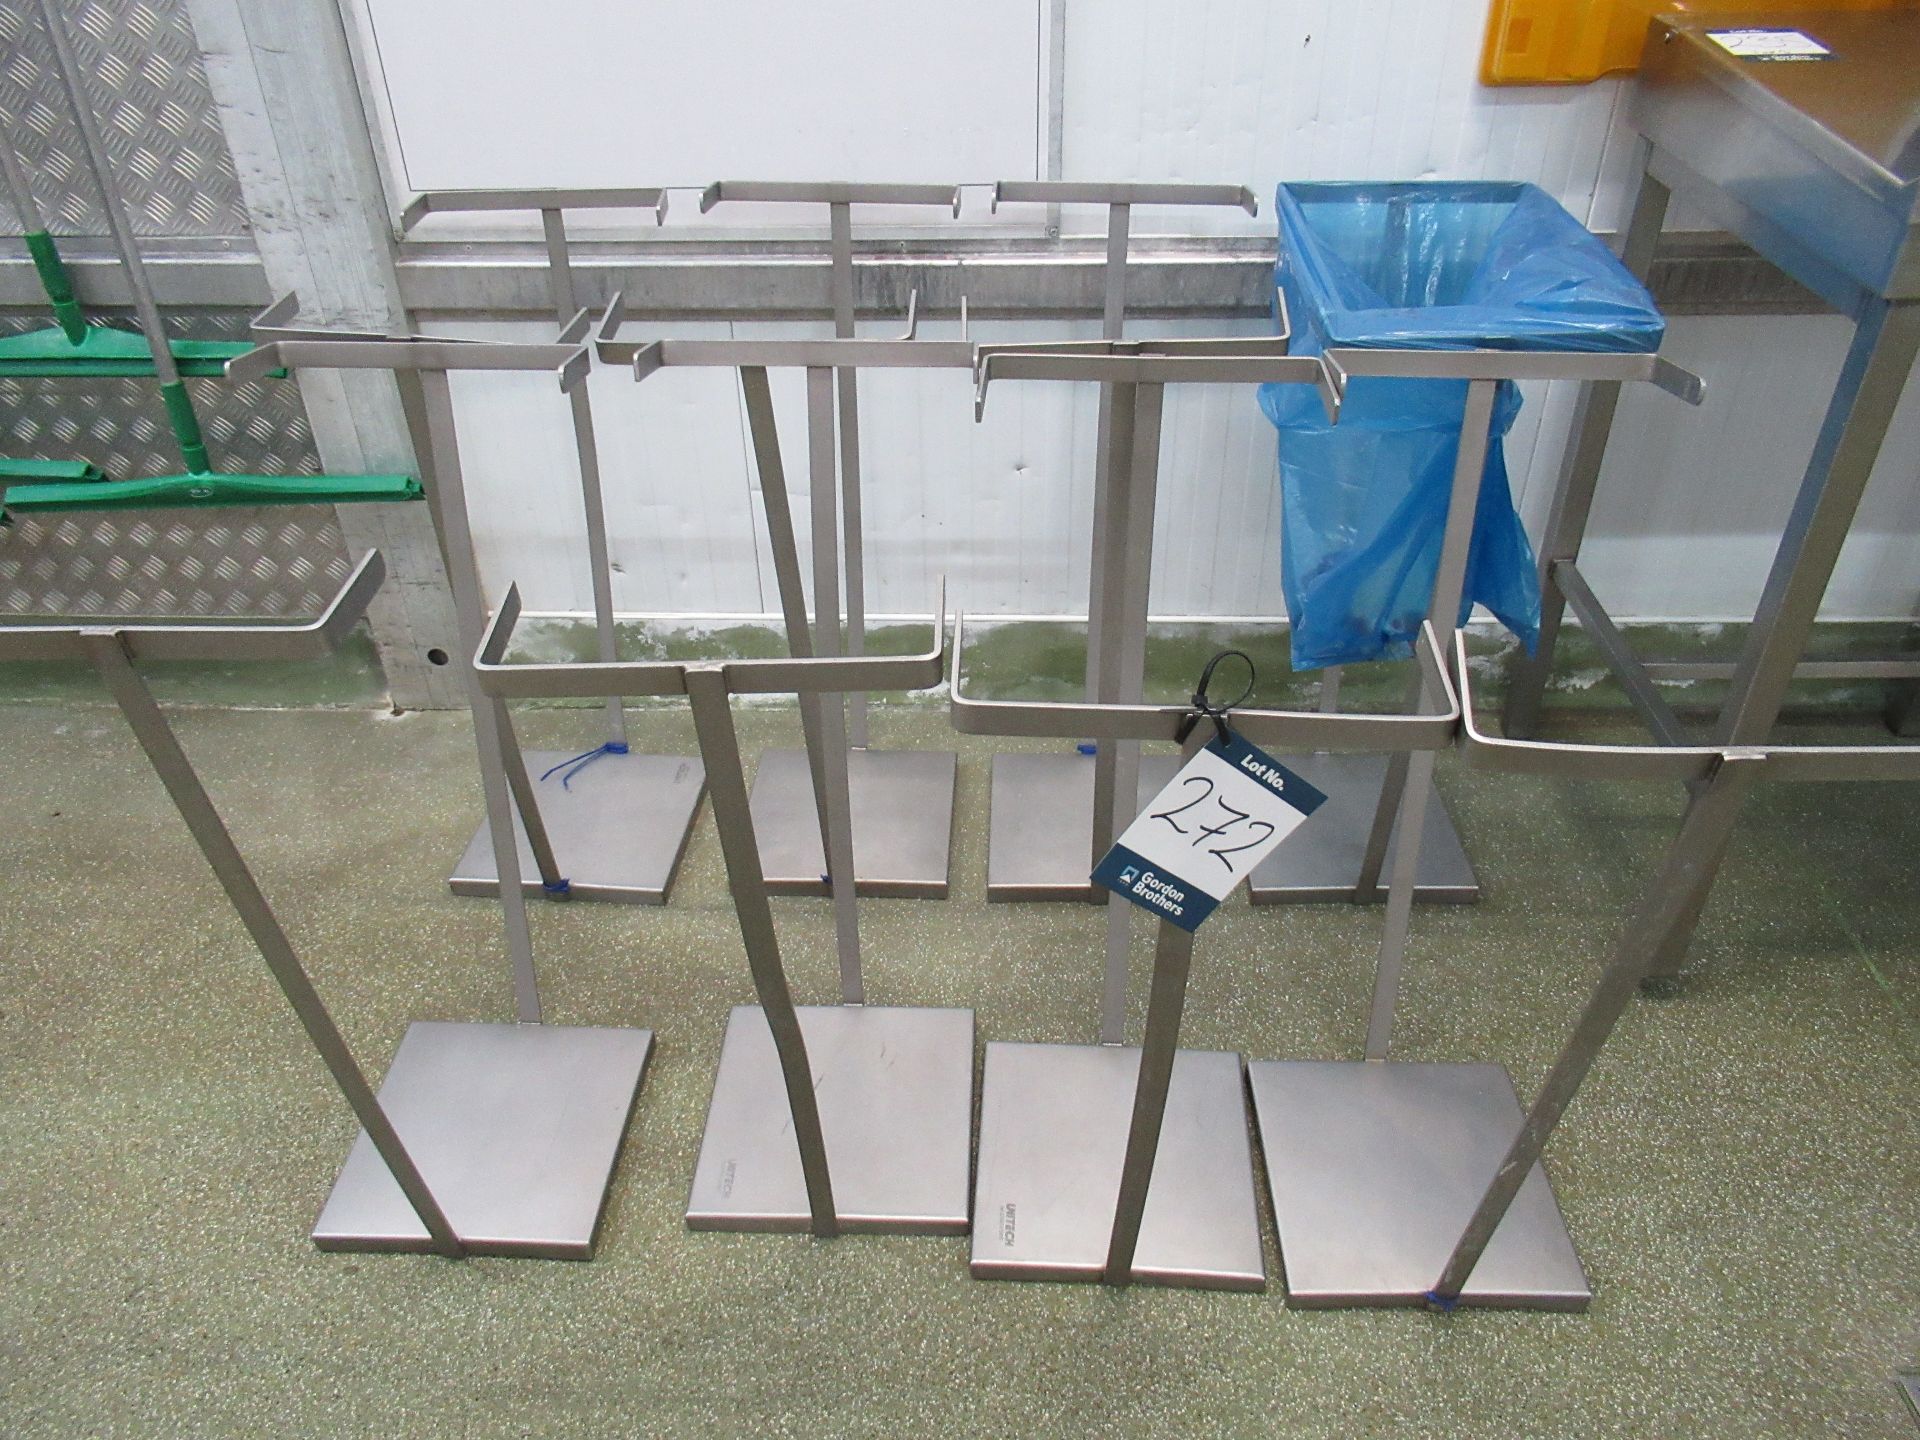 8 Unitech stainless steel waste bag holders - Image 3 of 5